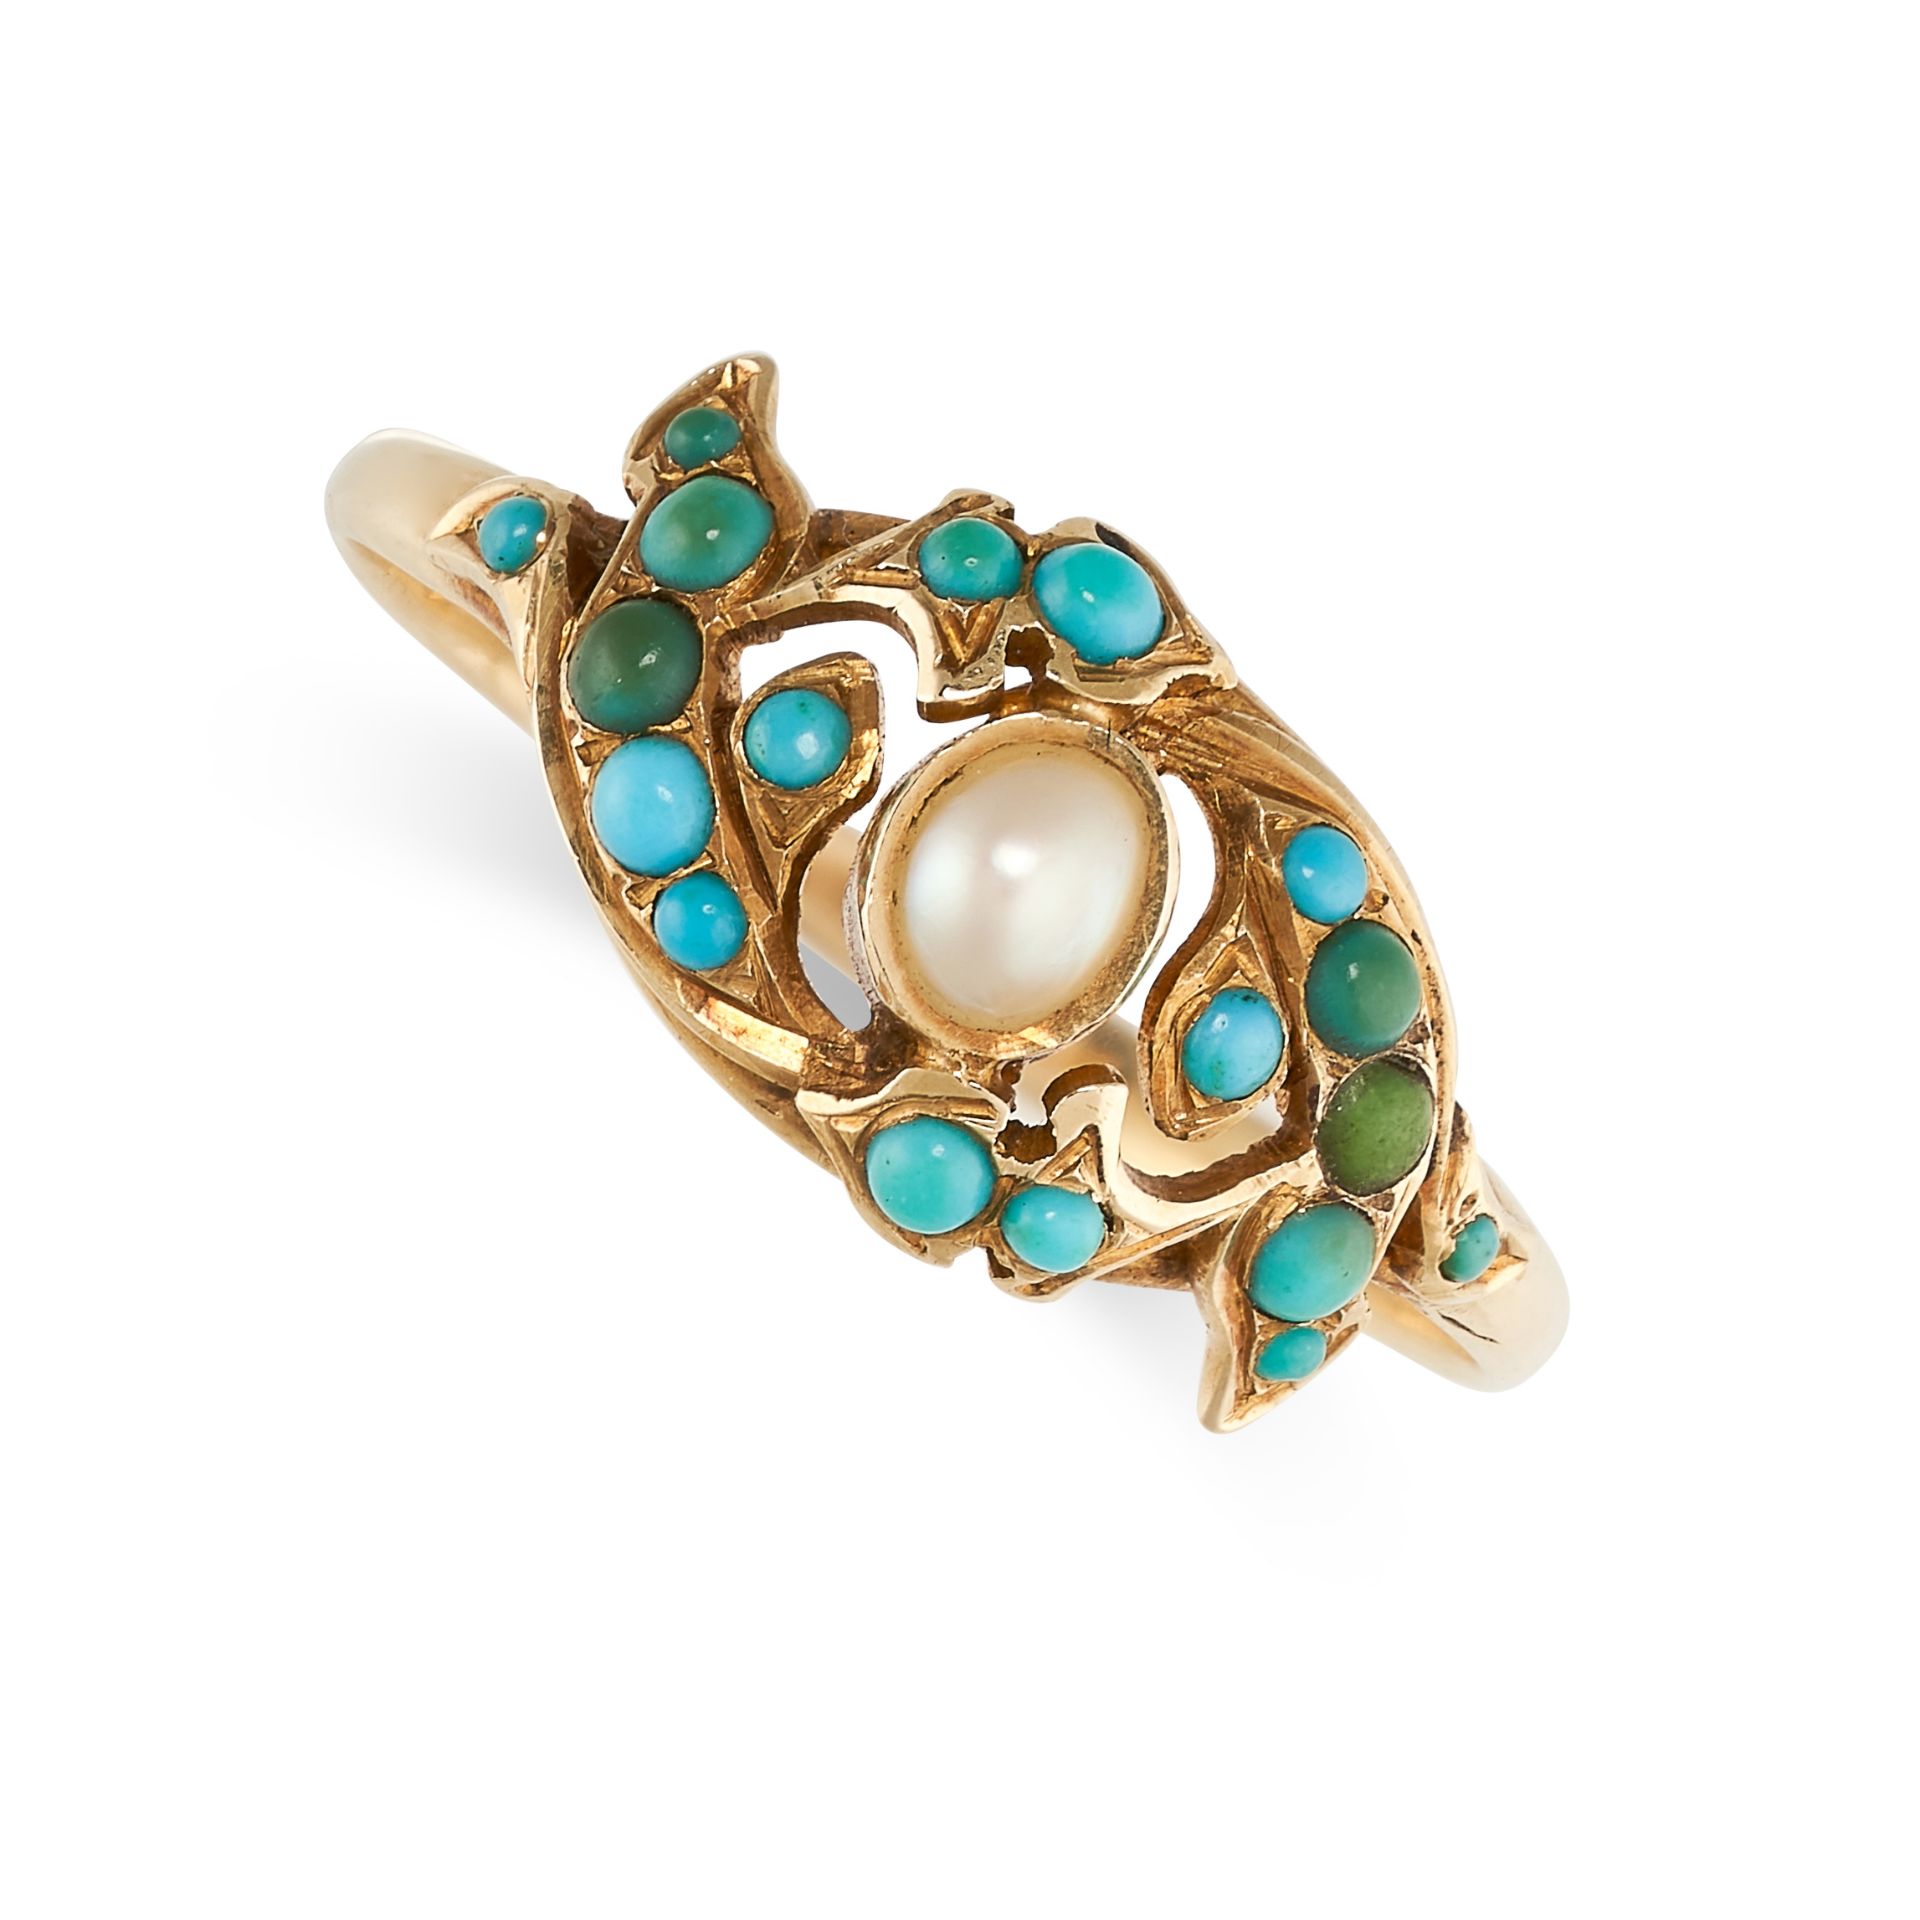 NO RESERVE - AN ANTIQUE PEARL AND TURQUOISE DRESS RING in yellow gold, the band set with a pearl